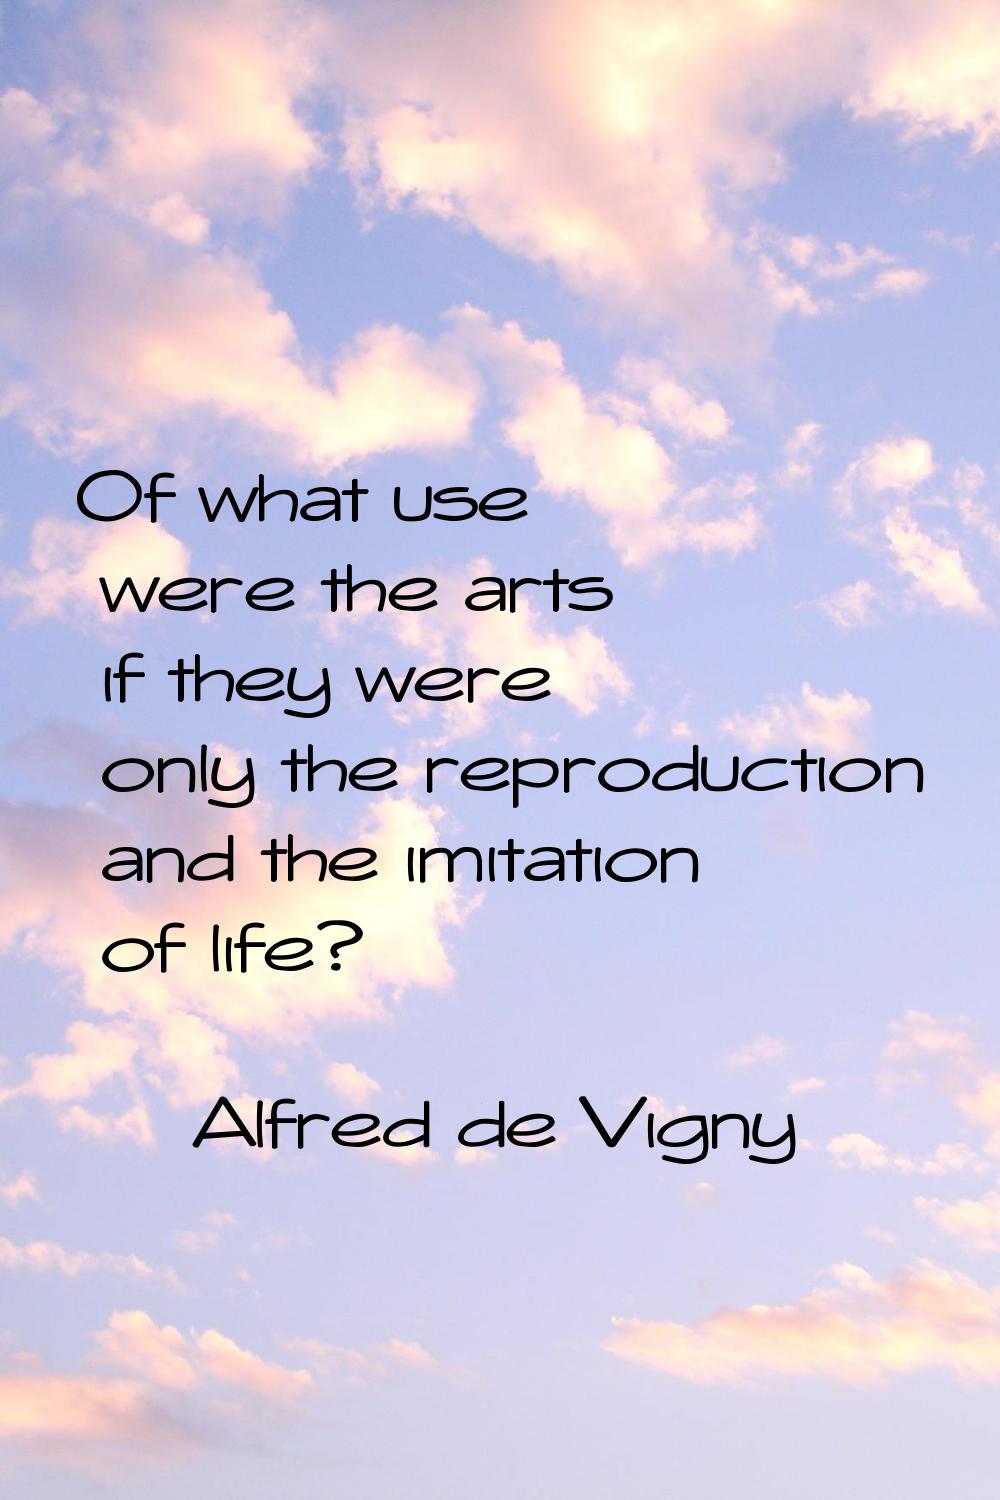 Of what use were the arts if they were only the reproduction and the imitation of life?